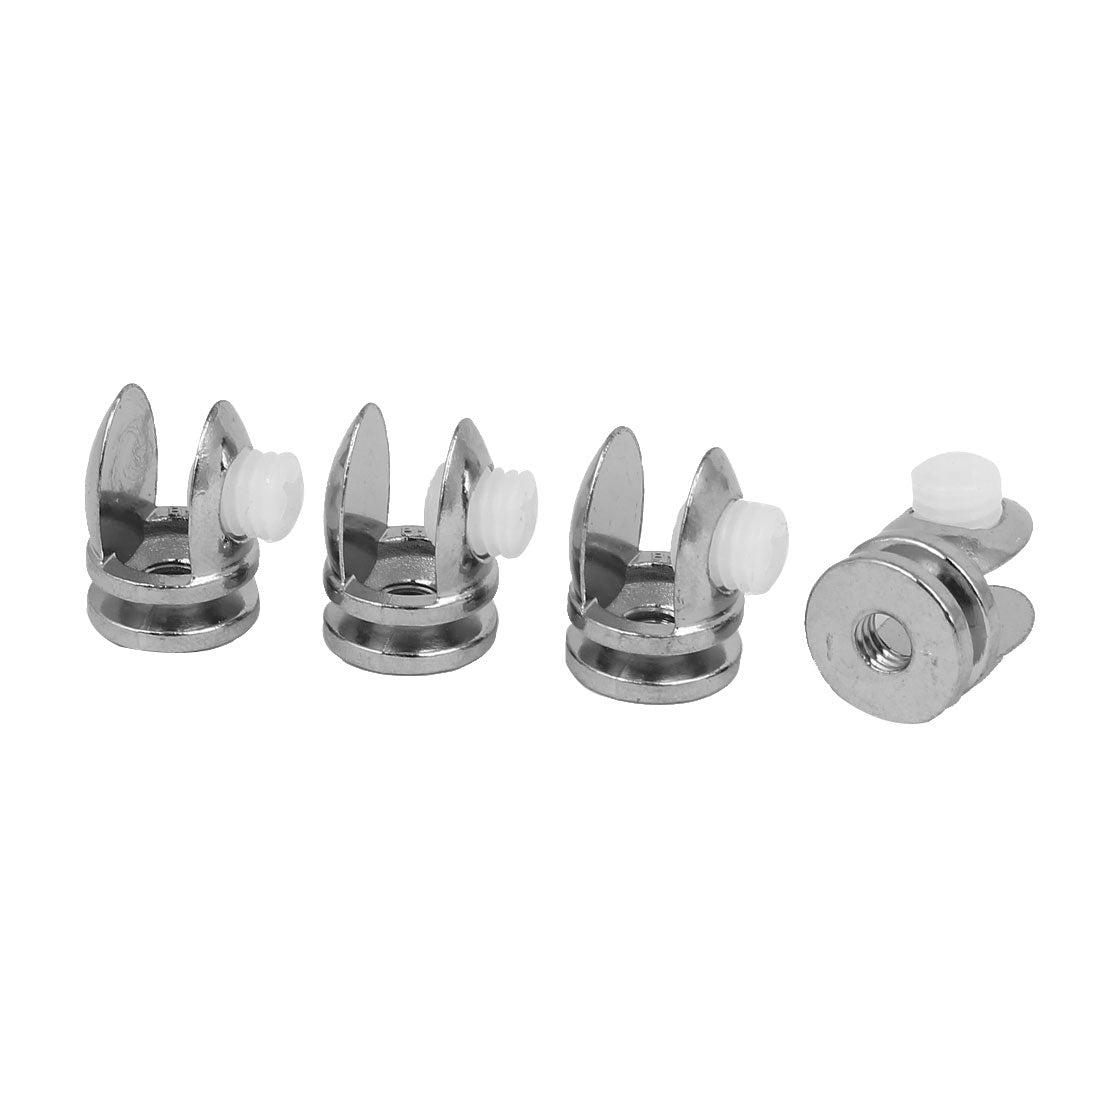 uxcell Uxcell Adjustable Shelf Support Clamp Clip Silver Tone 4pcs for 6mm-8mm Thickness Glass